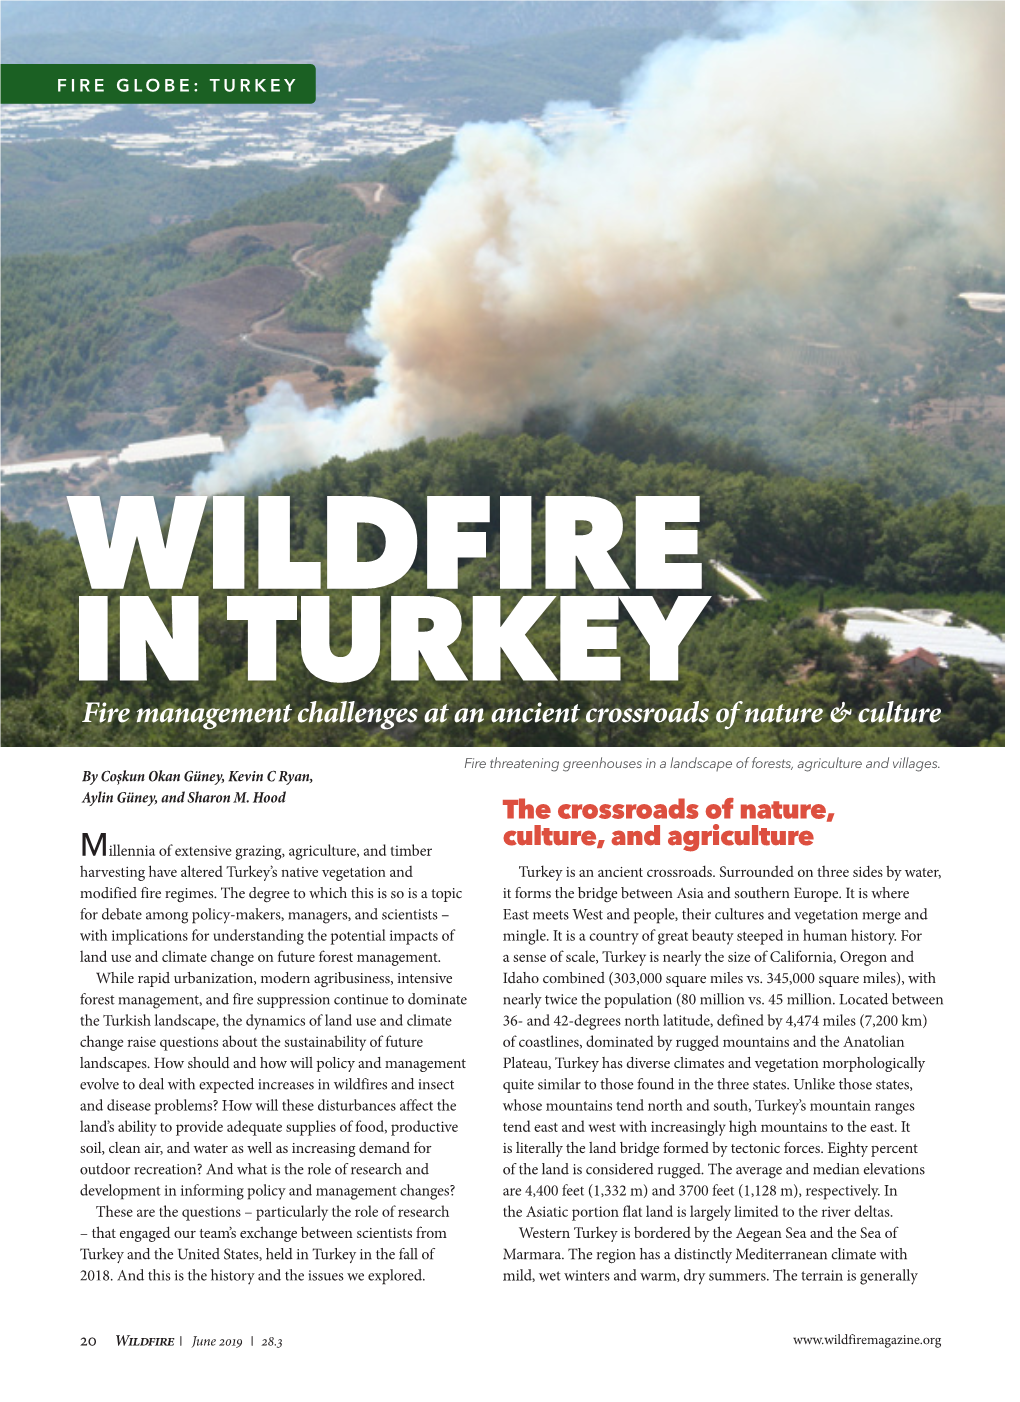 WILDFIRE in TURKEY Fire Management Challenges at an Ancient Crossroads of Nature & Culture